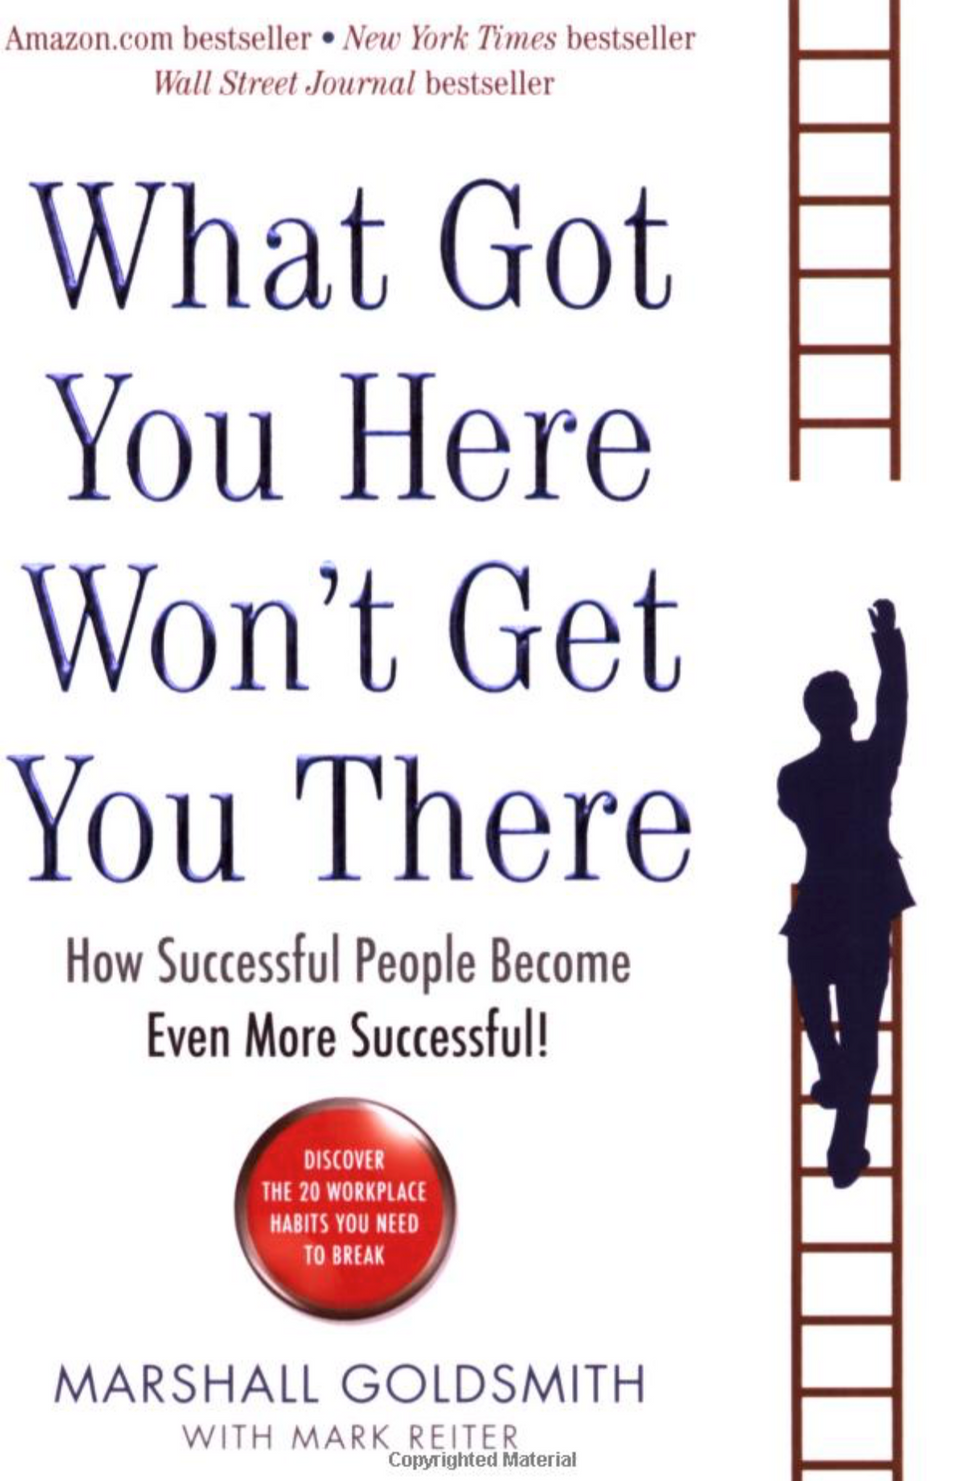 What Got You Here Won’t Get You There by Marshall Goldsmith